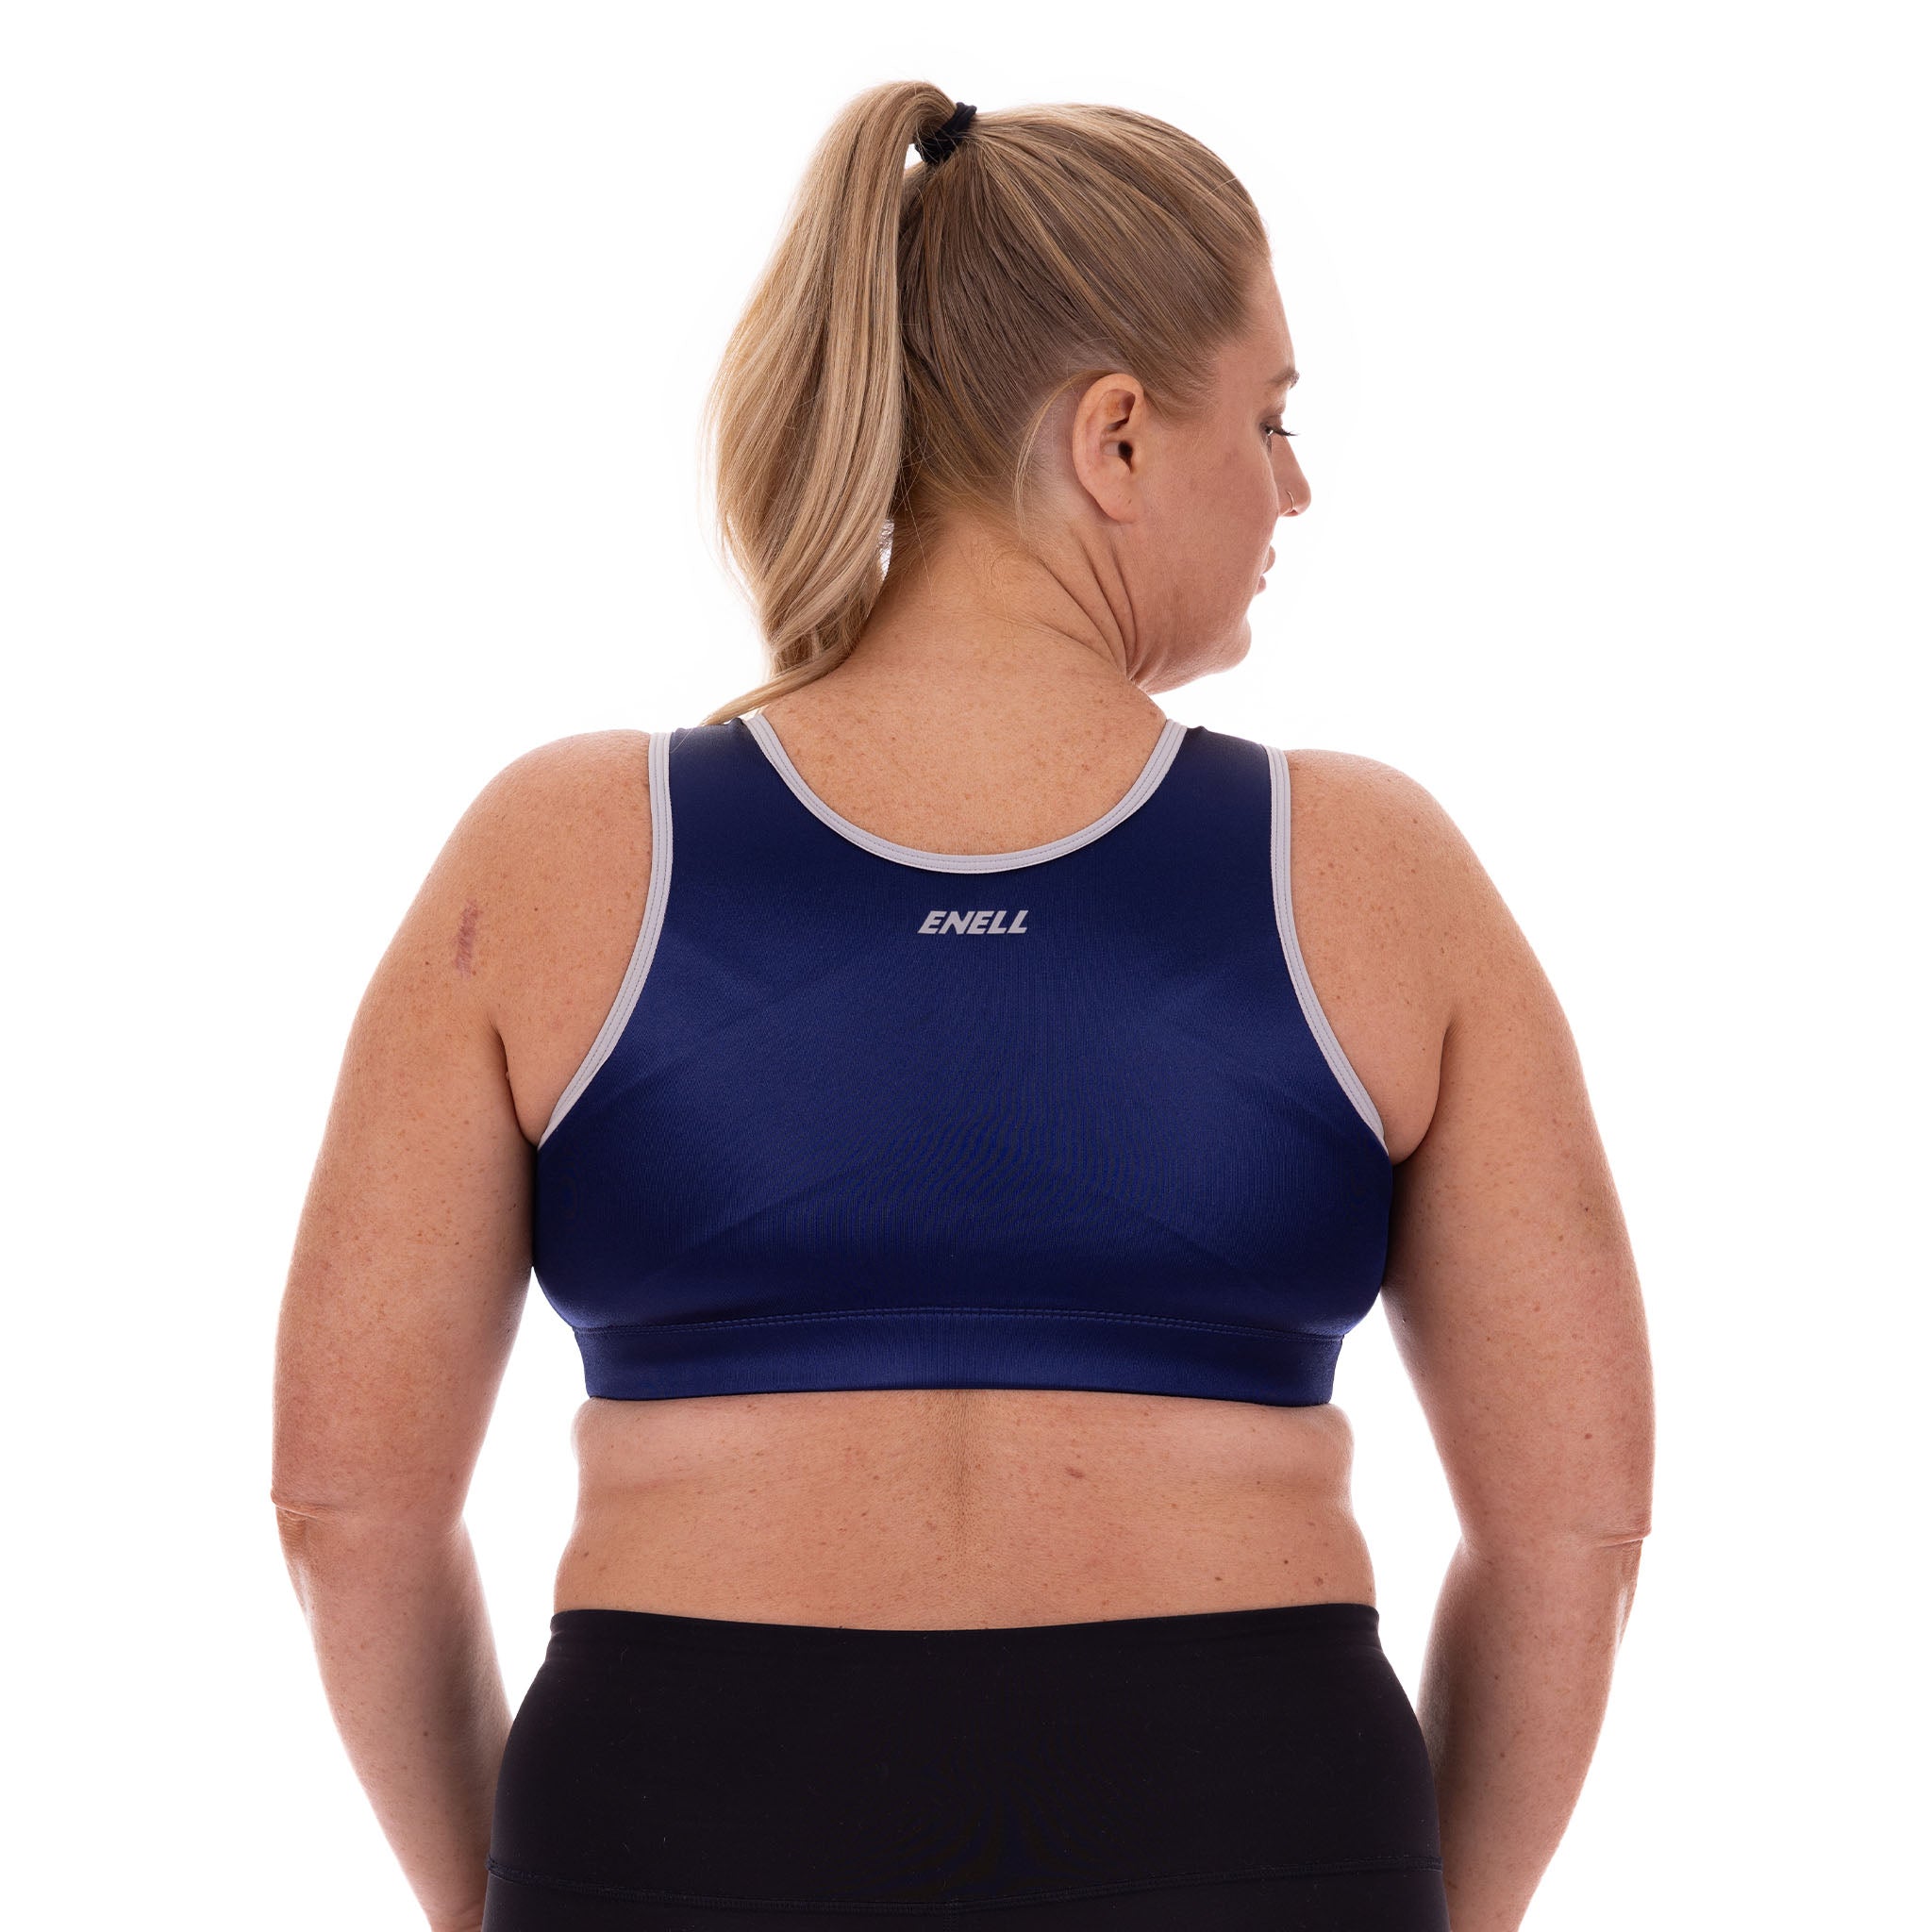 Current Sports Bra Favorites (That Are Actually Supportive